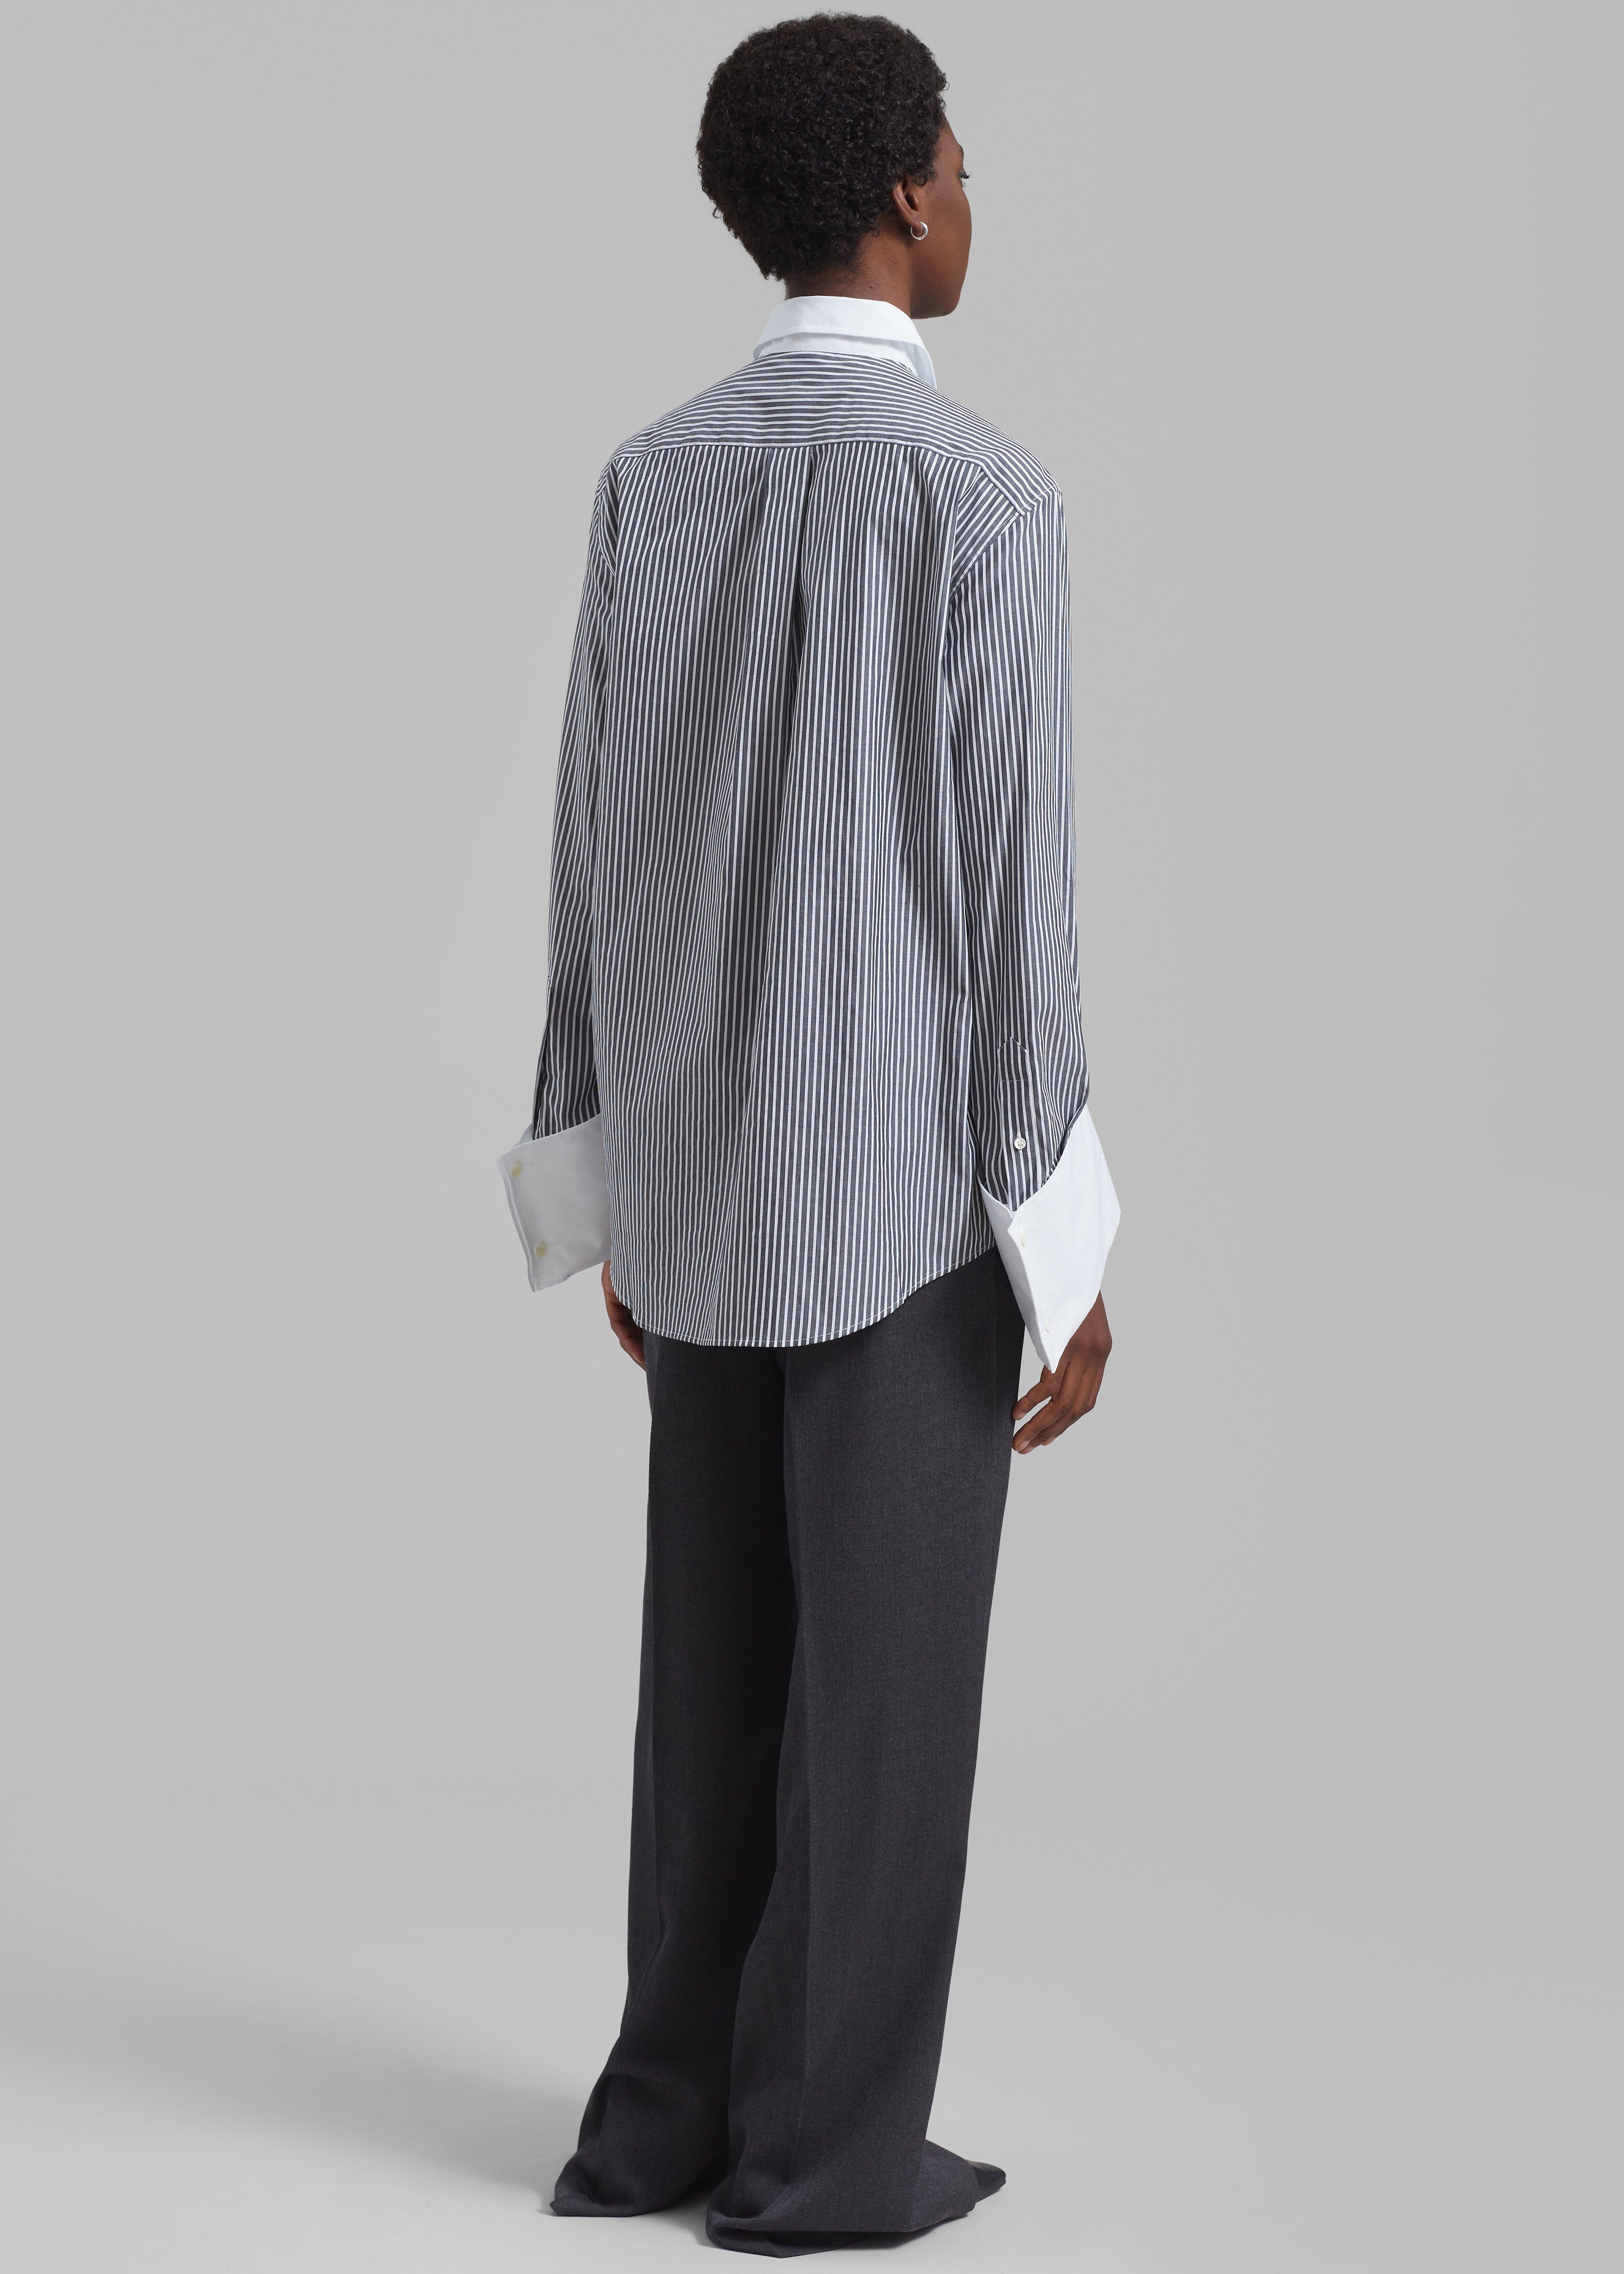 JW Anderson Oversized Cuff Shirt - Charcoal/White - 9